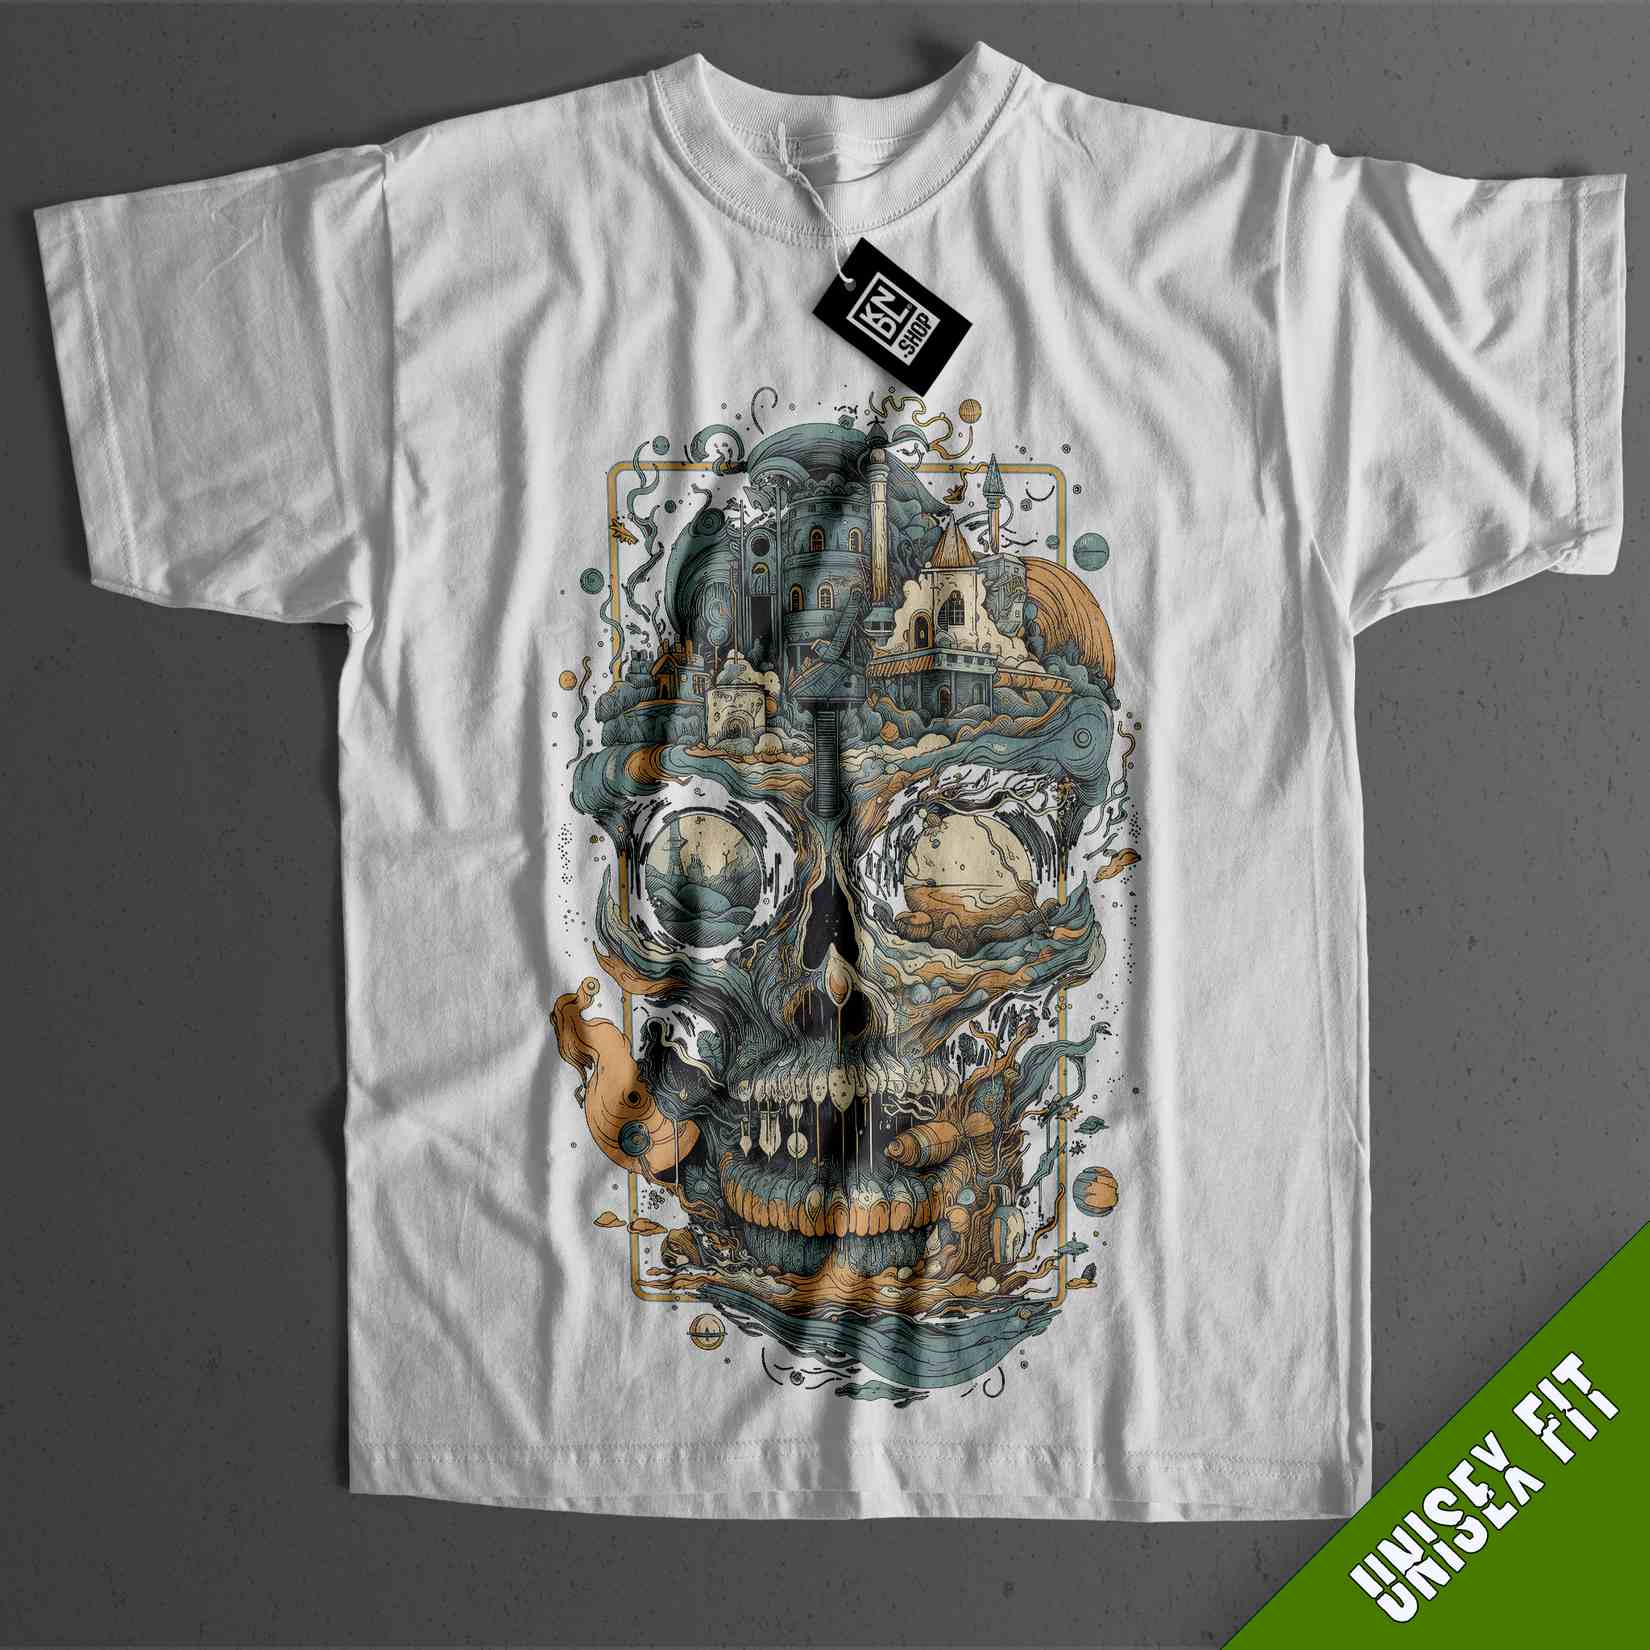 a white t - shirt with a picture of a skull on it